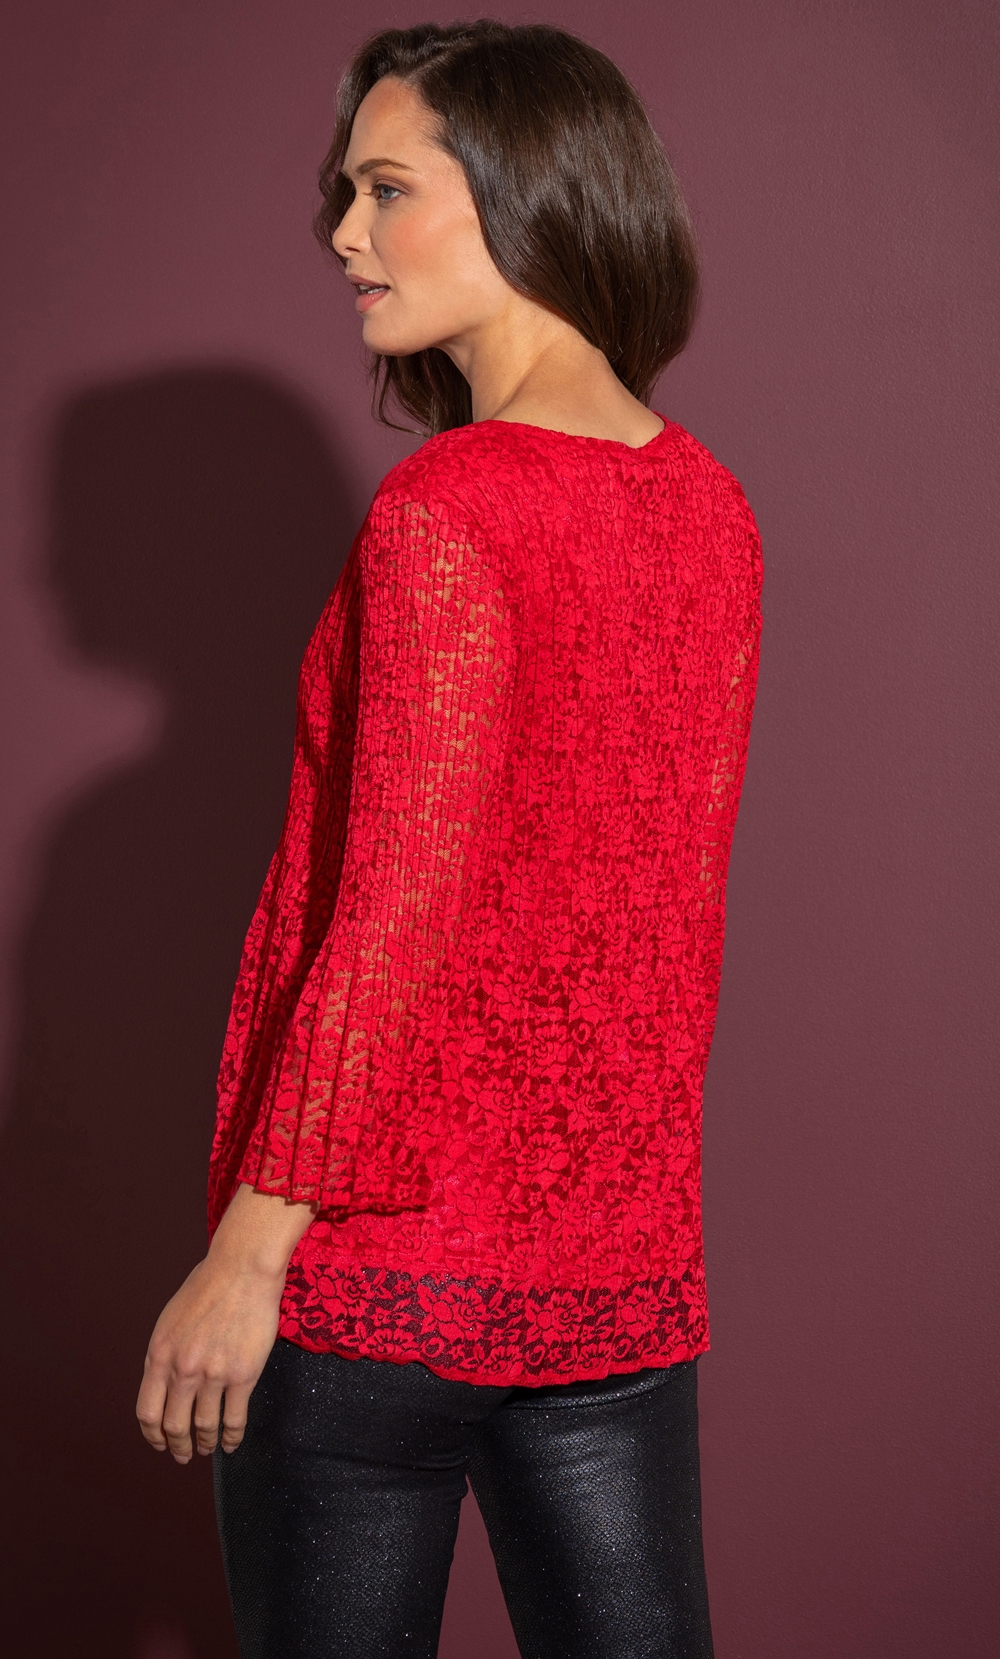 Pleated Lace Evening Top in Red | Klass